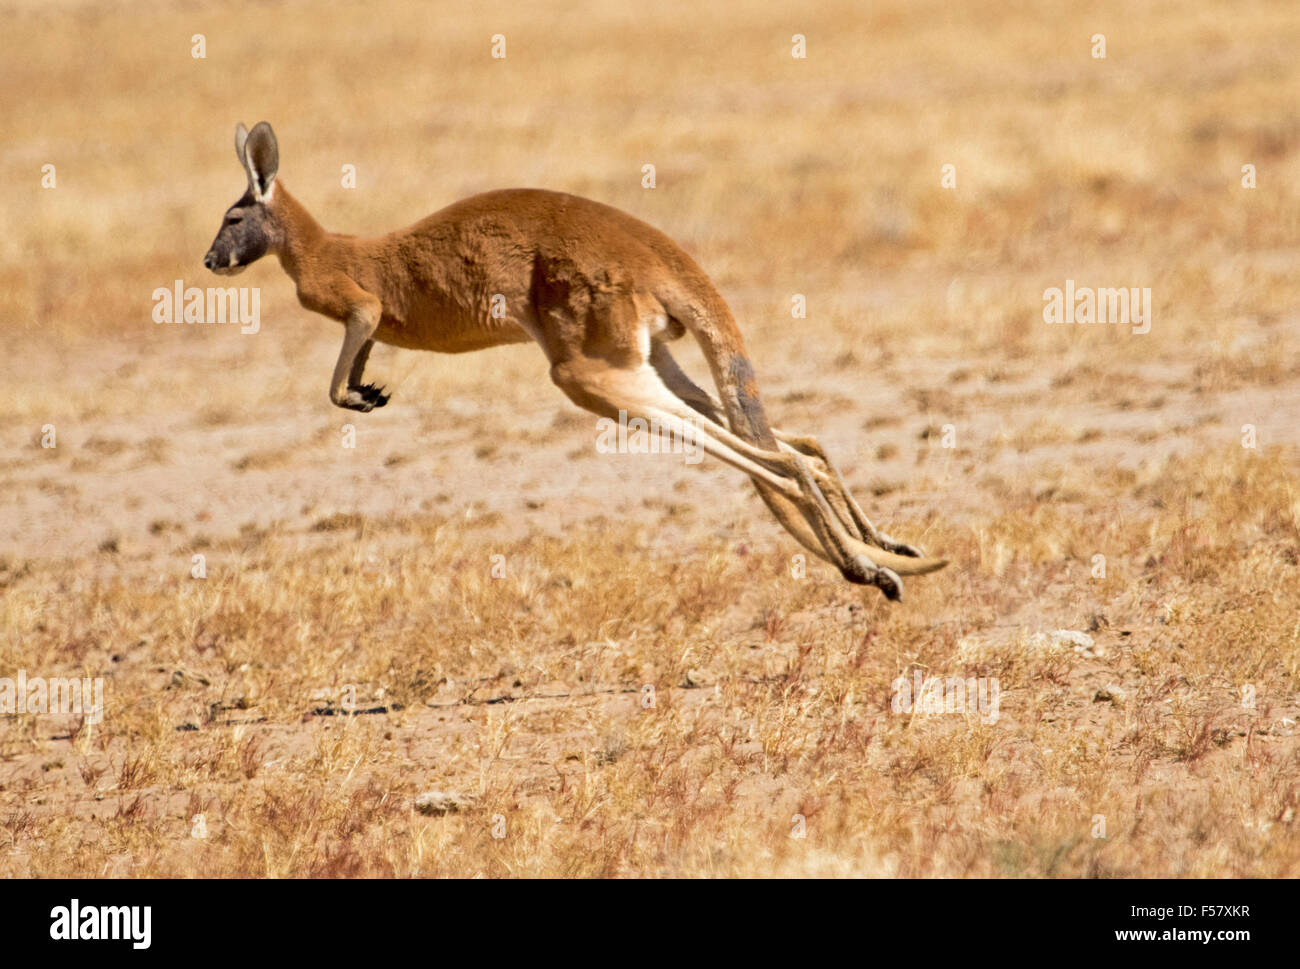 Male red kangaroo, Macropus rufus, in mid-air, with legs extended, bounding across arid Australian outback landscape Stock Photo